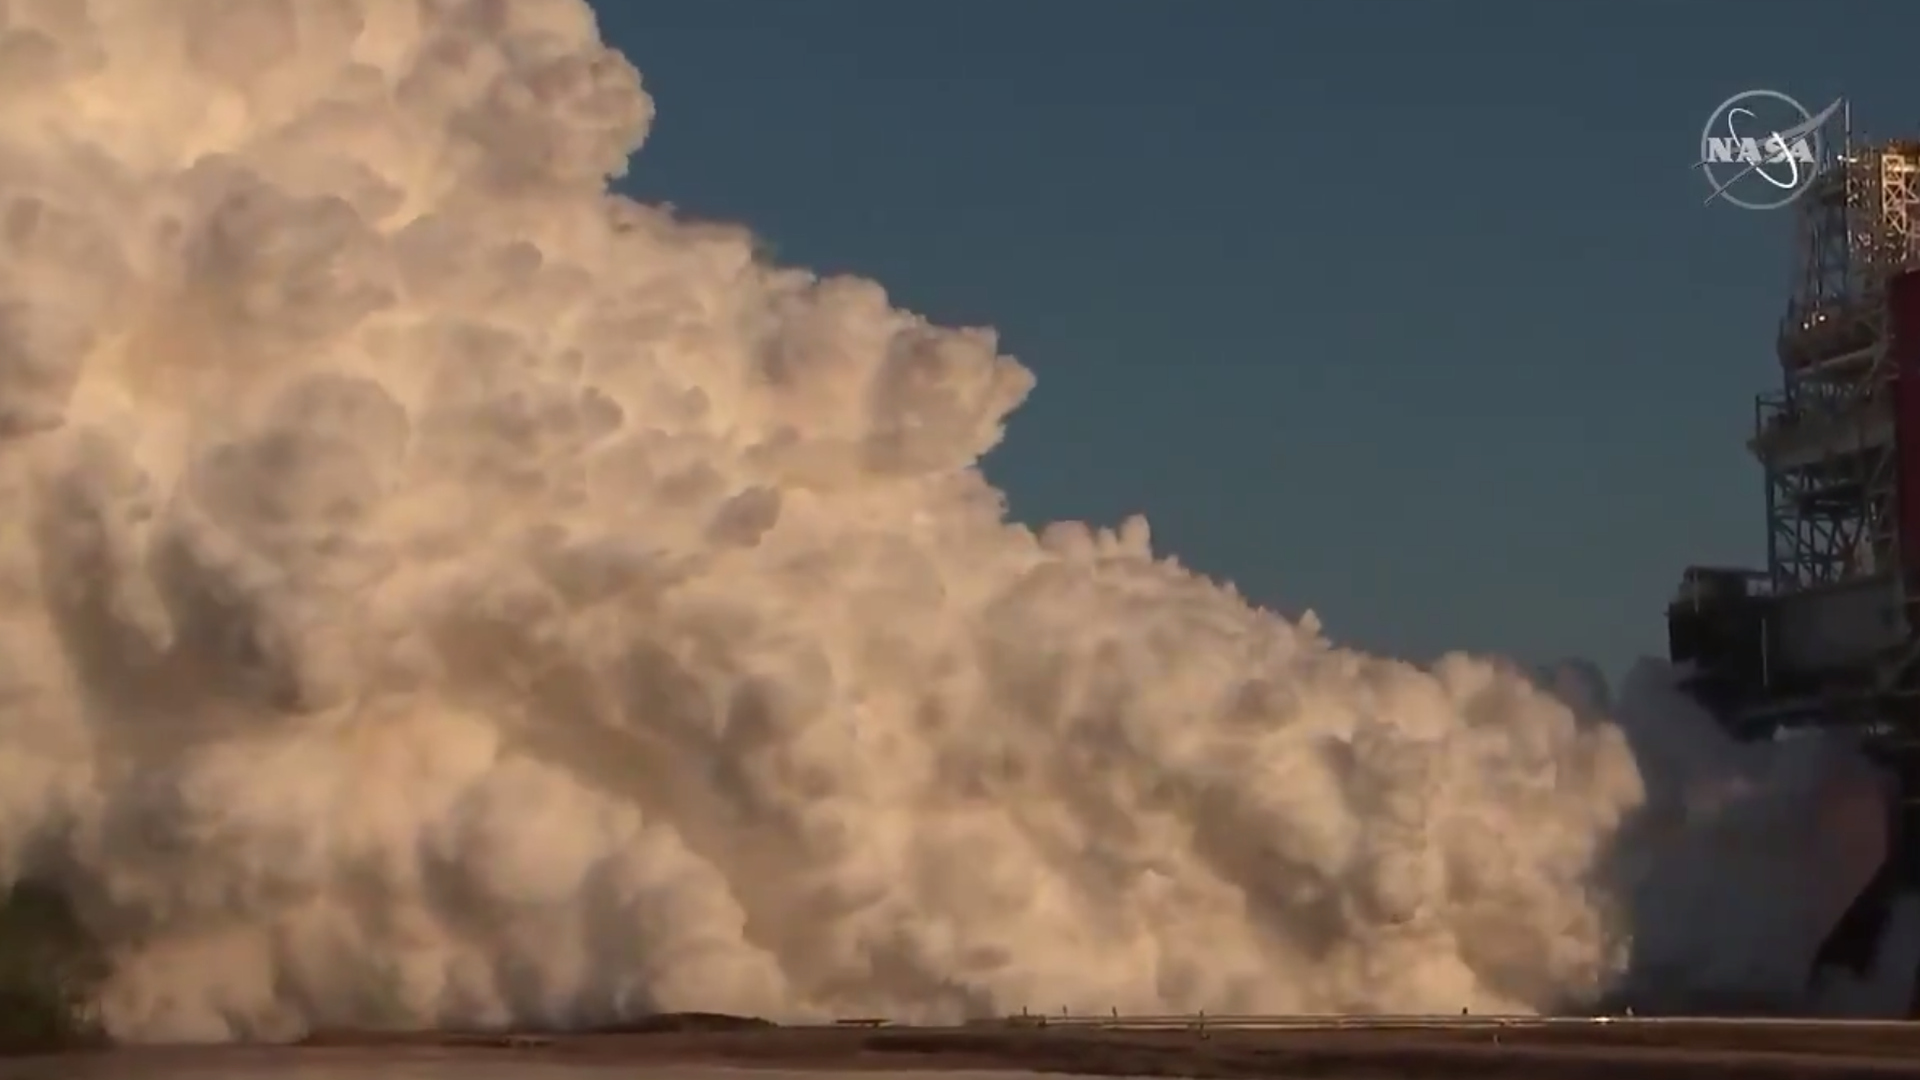 A cloud of smoke produced by a test firing of NASA's Space Launch System rocket